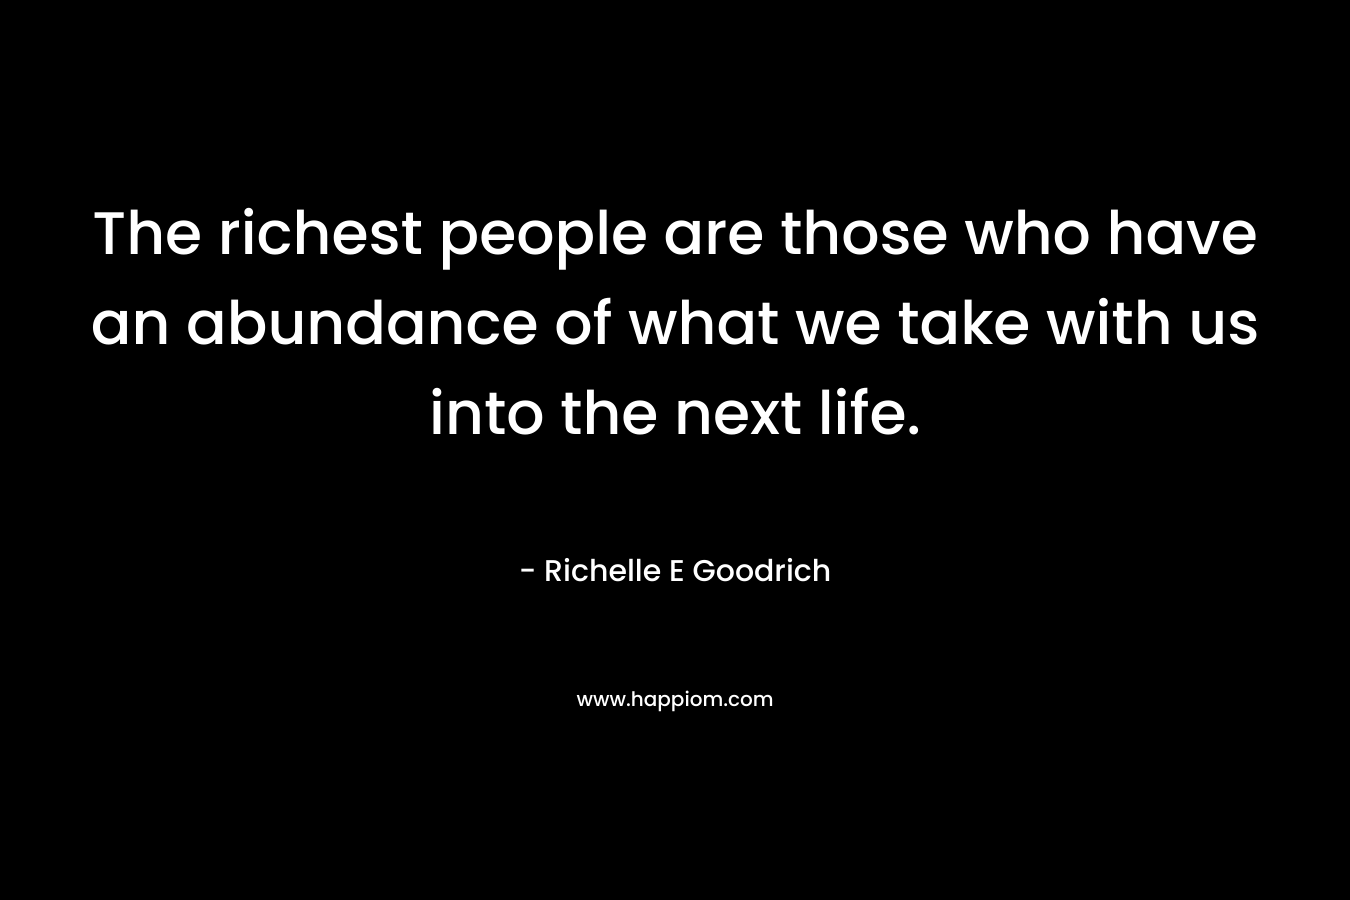 The richest people are those who have an abundance of what we take with us into the next life.